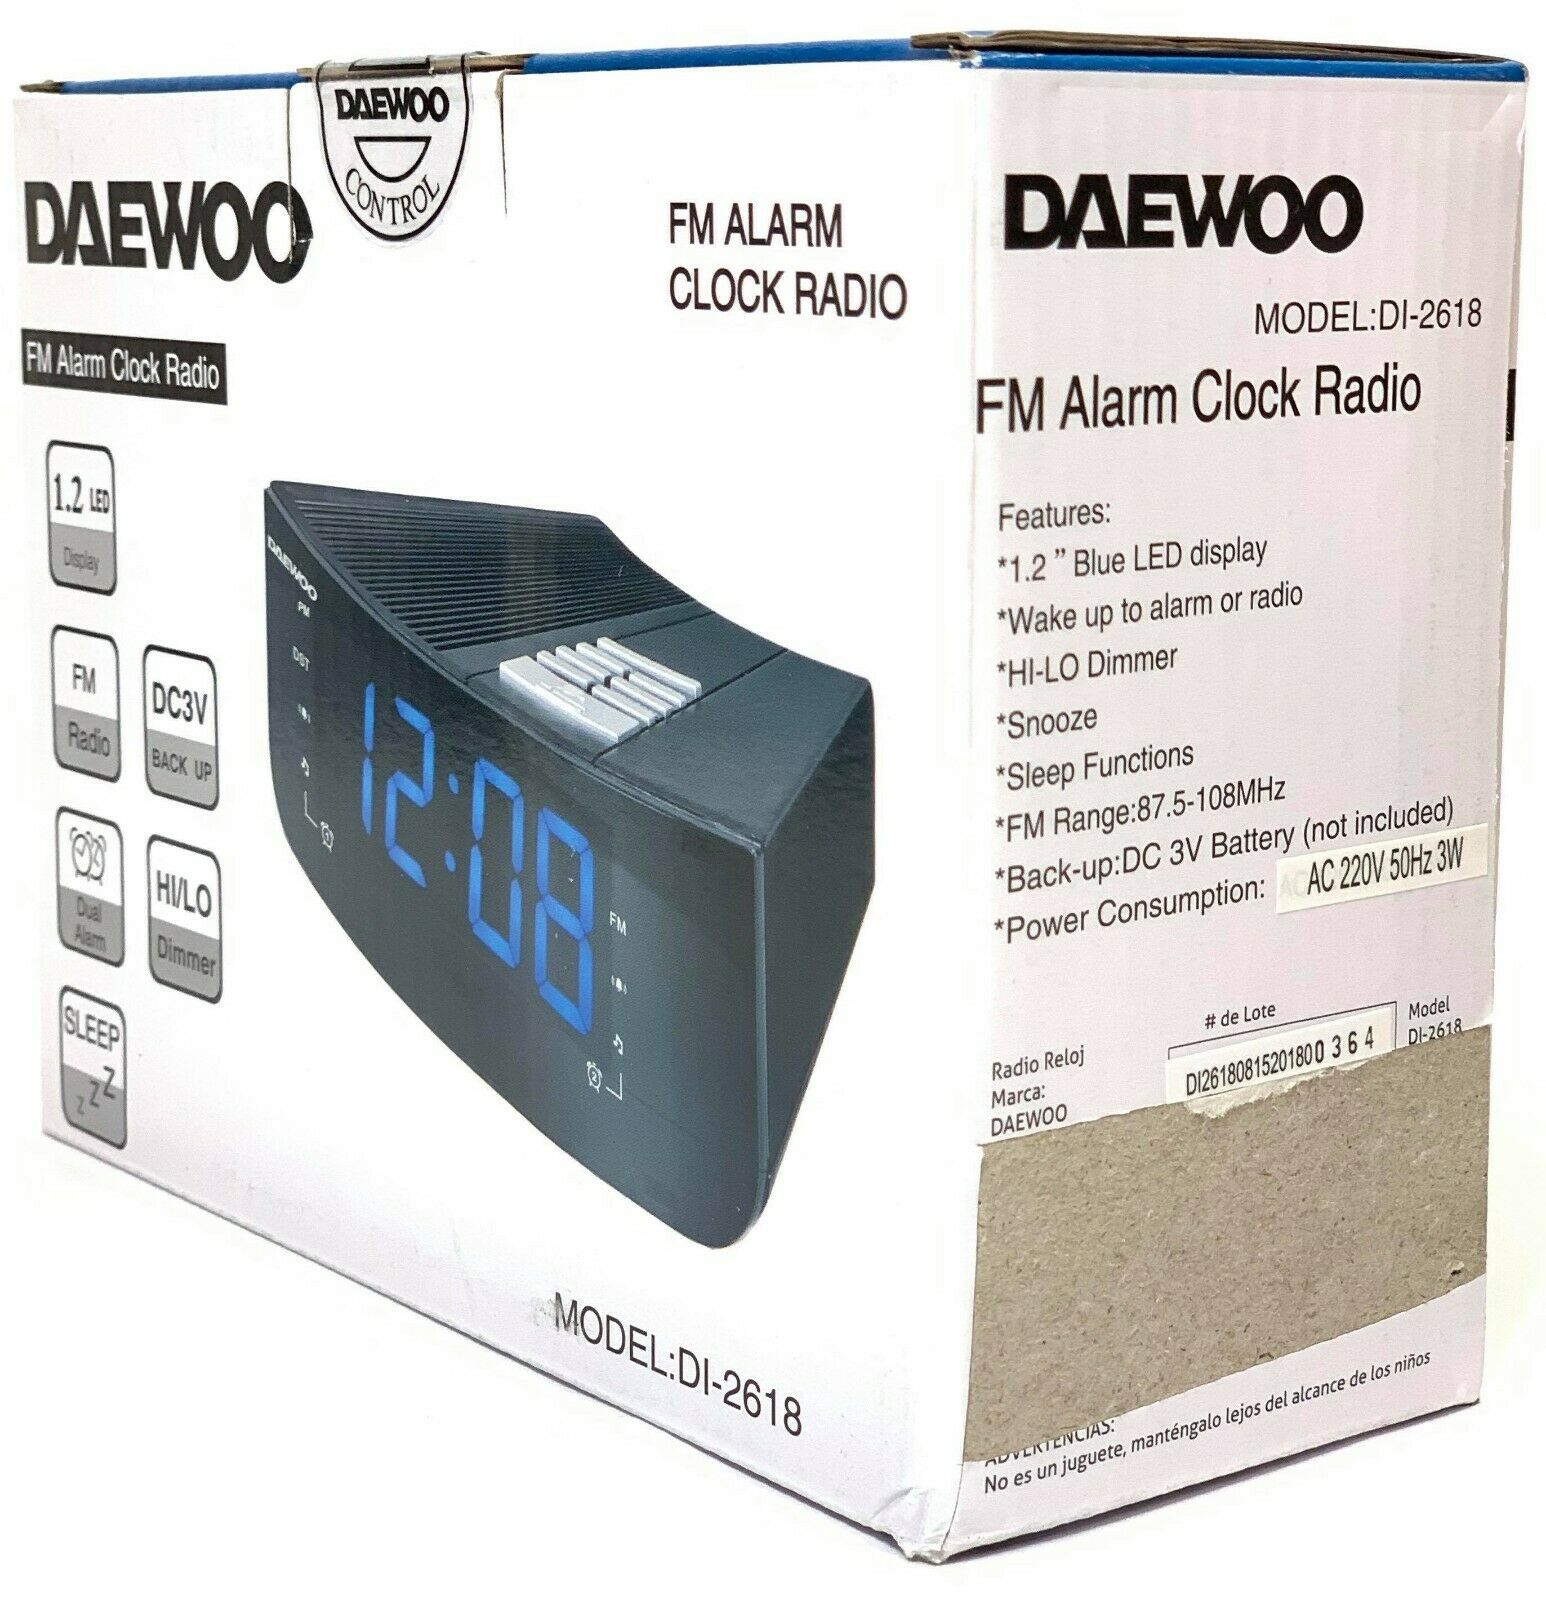 New Daewoo 220 Volt DI-2628 Alarm Clock Radio for Export 220v Overseas Use Only 